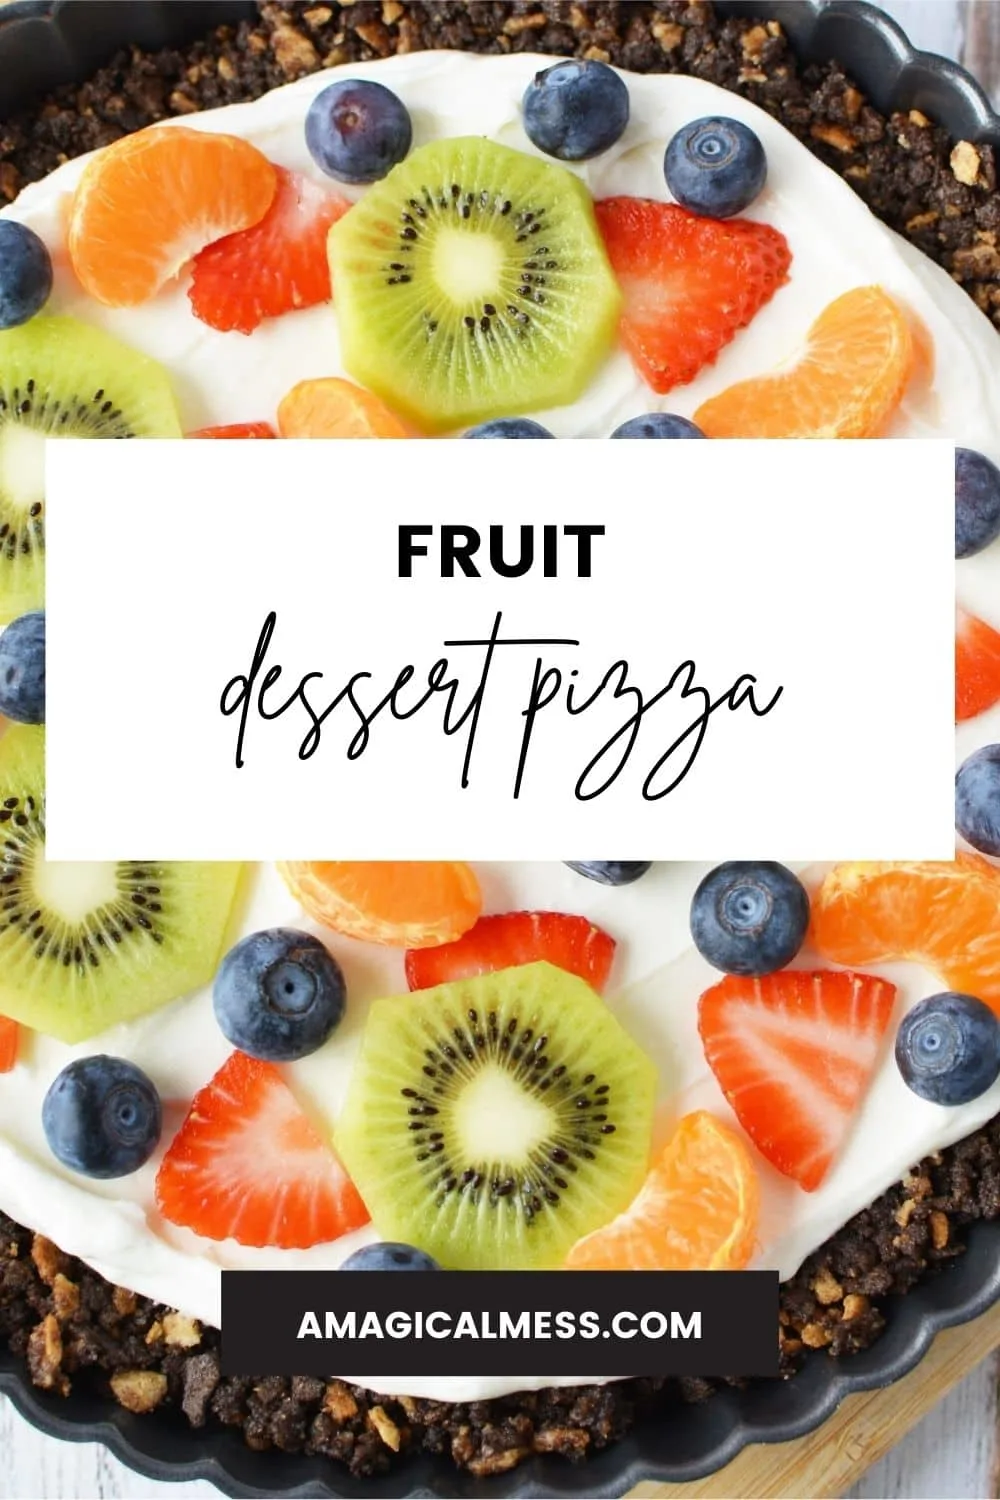 Slices of kiwi, strawberries, and other fruit on a tart.